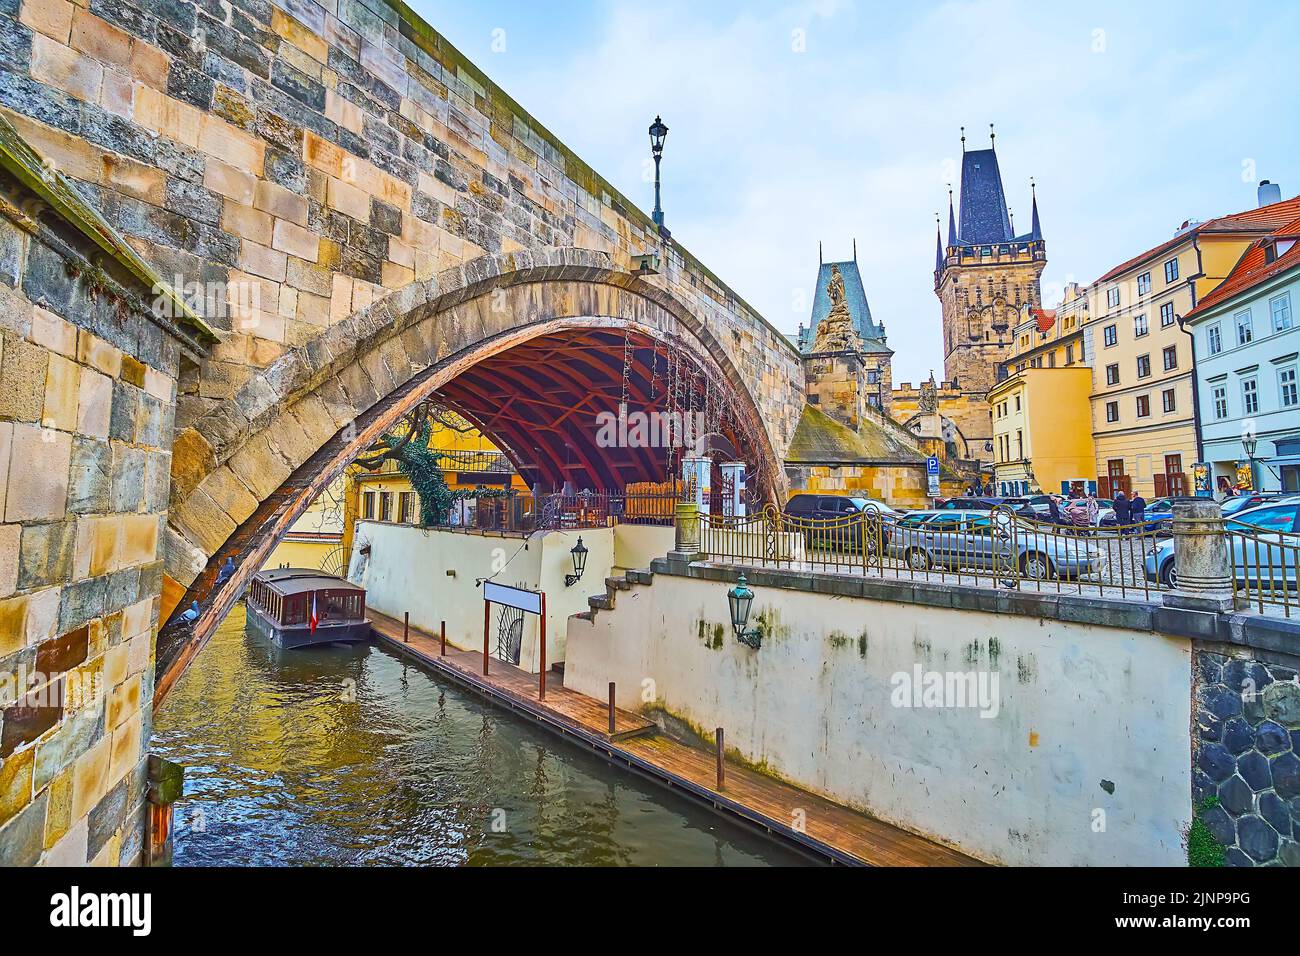 The arch of the medieval Charles Bridge and the narrow Certovka (Devil's Canal) with a view on the Mala Strana Bridge Tower in background, Prague, Cze Stock Photo